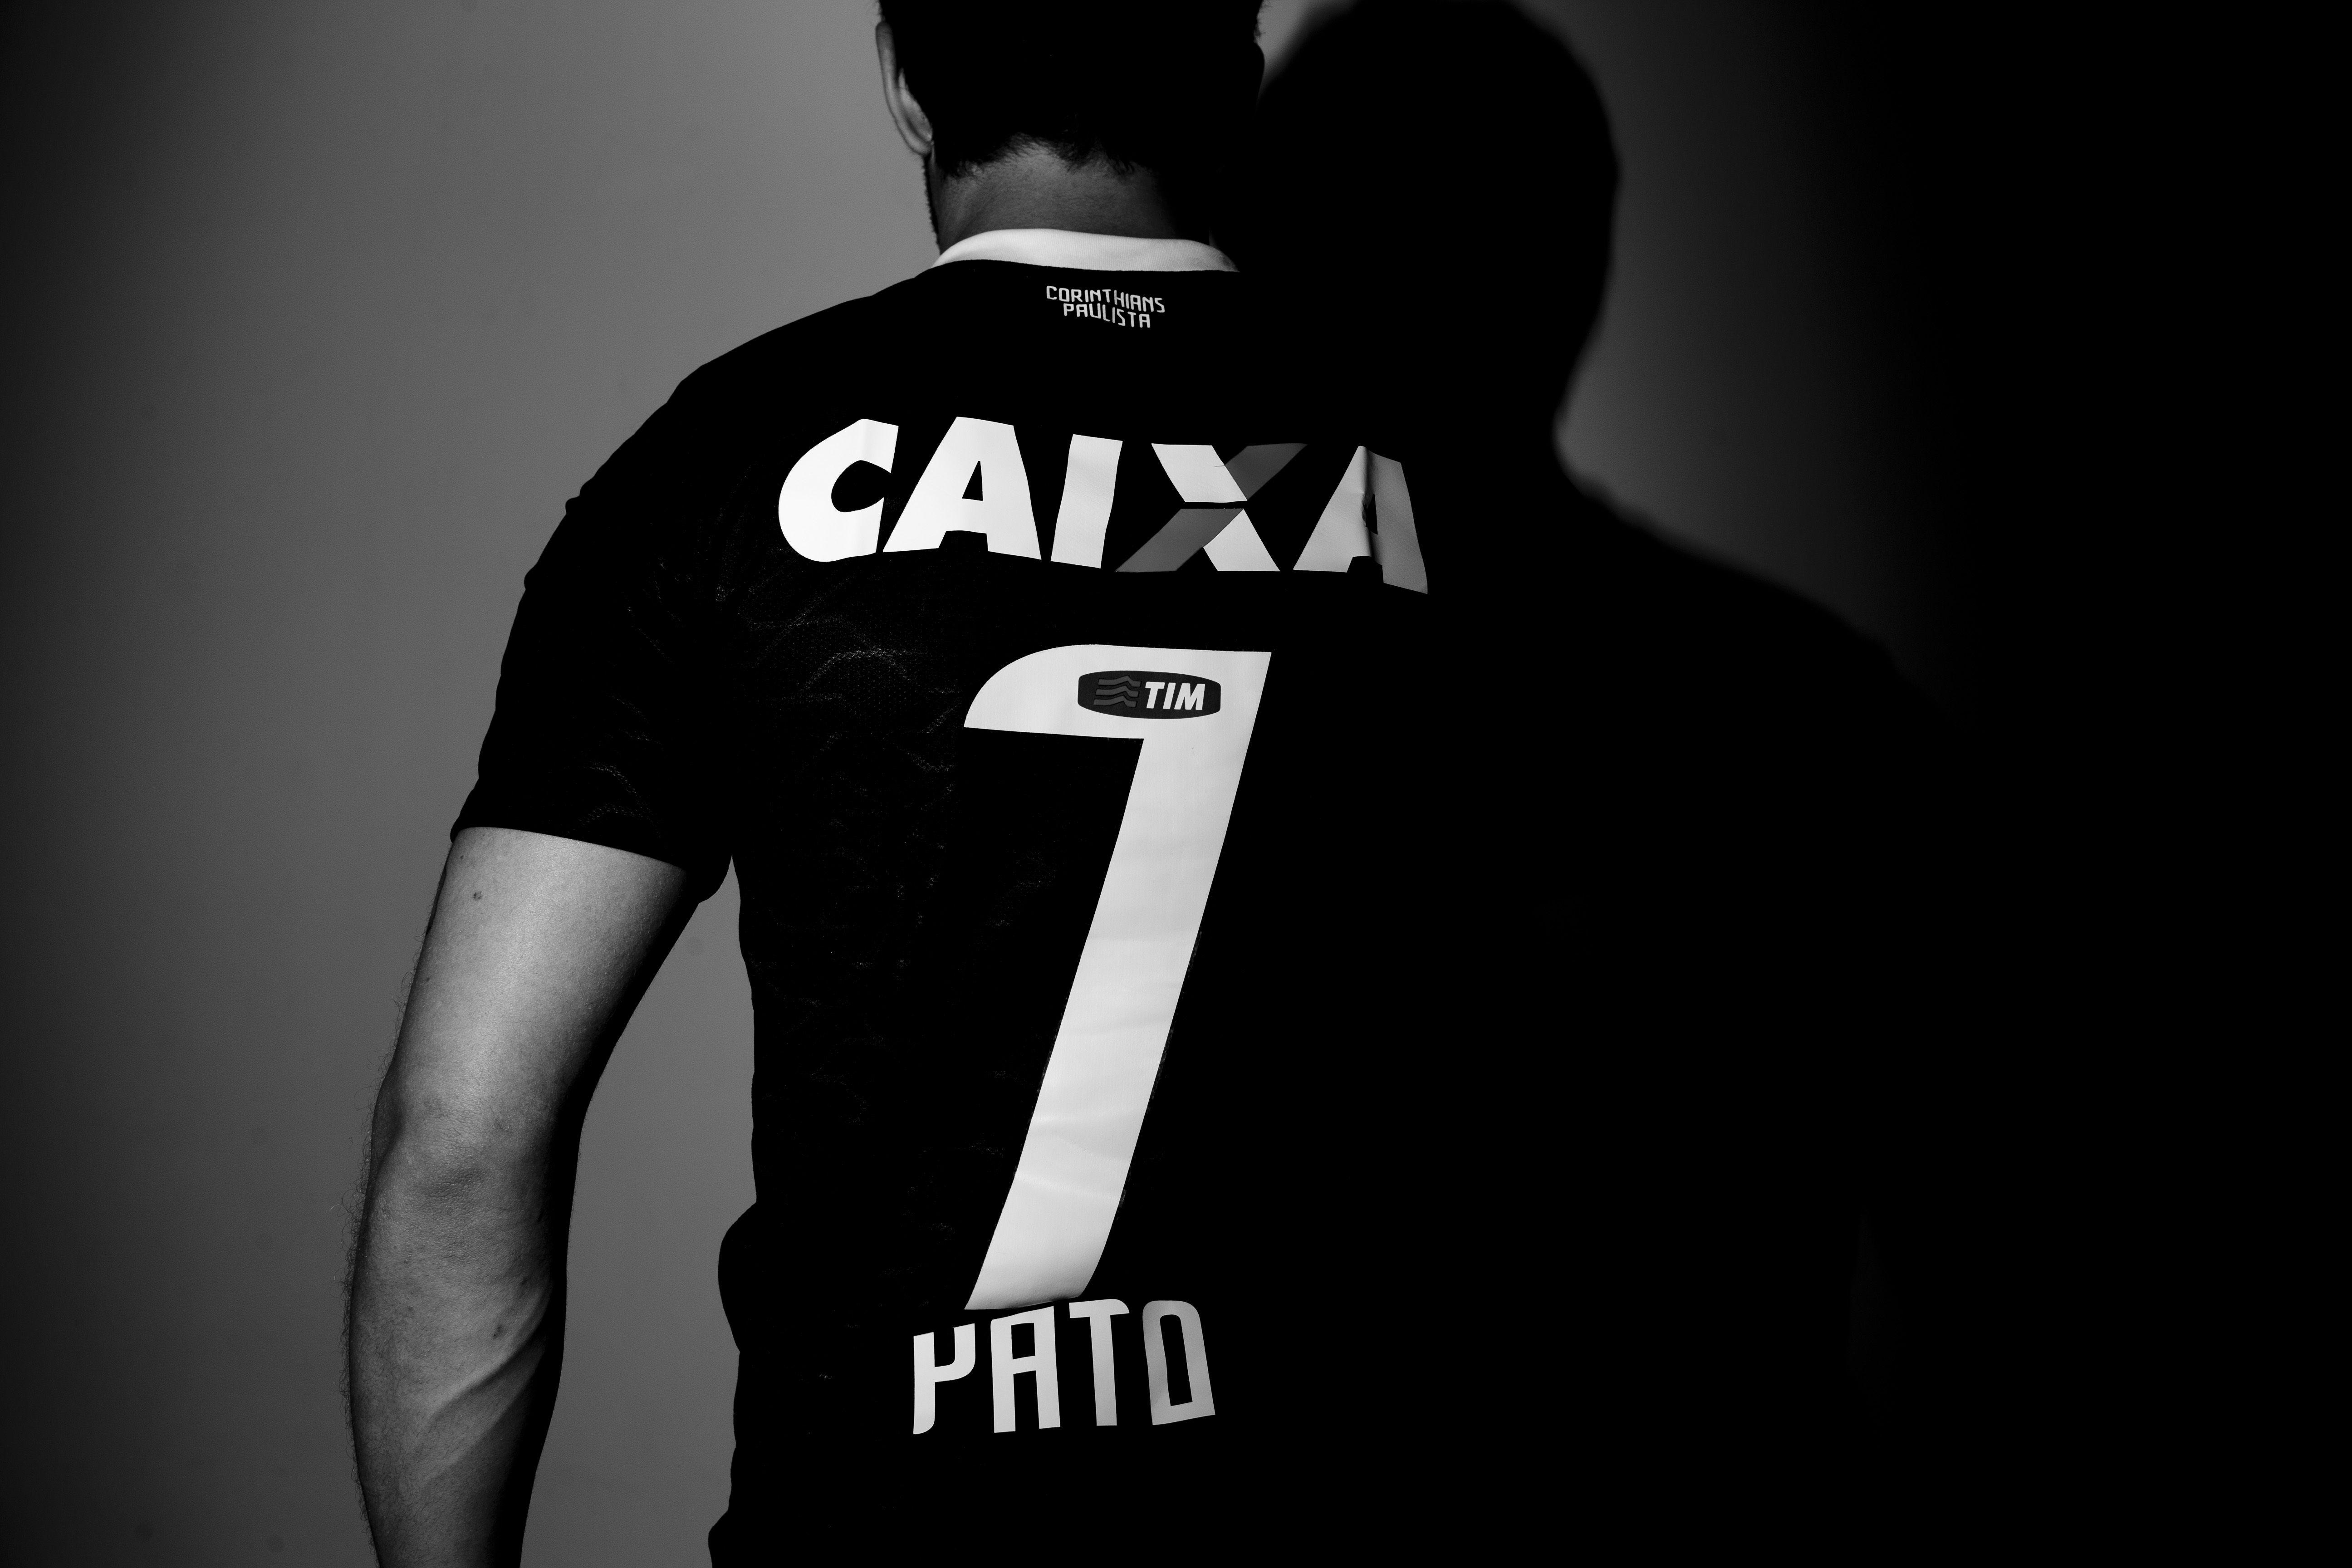 Corinthians Alexandre Pato in black wallpaper and image